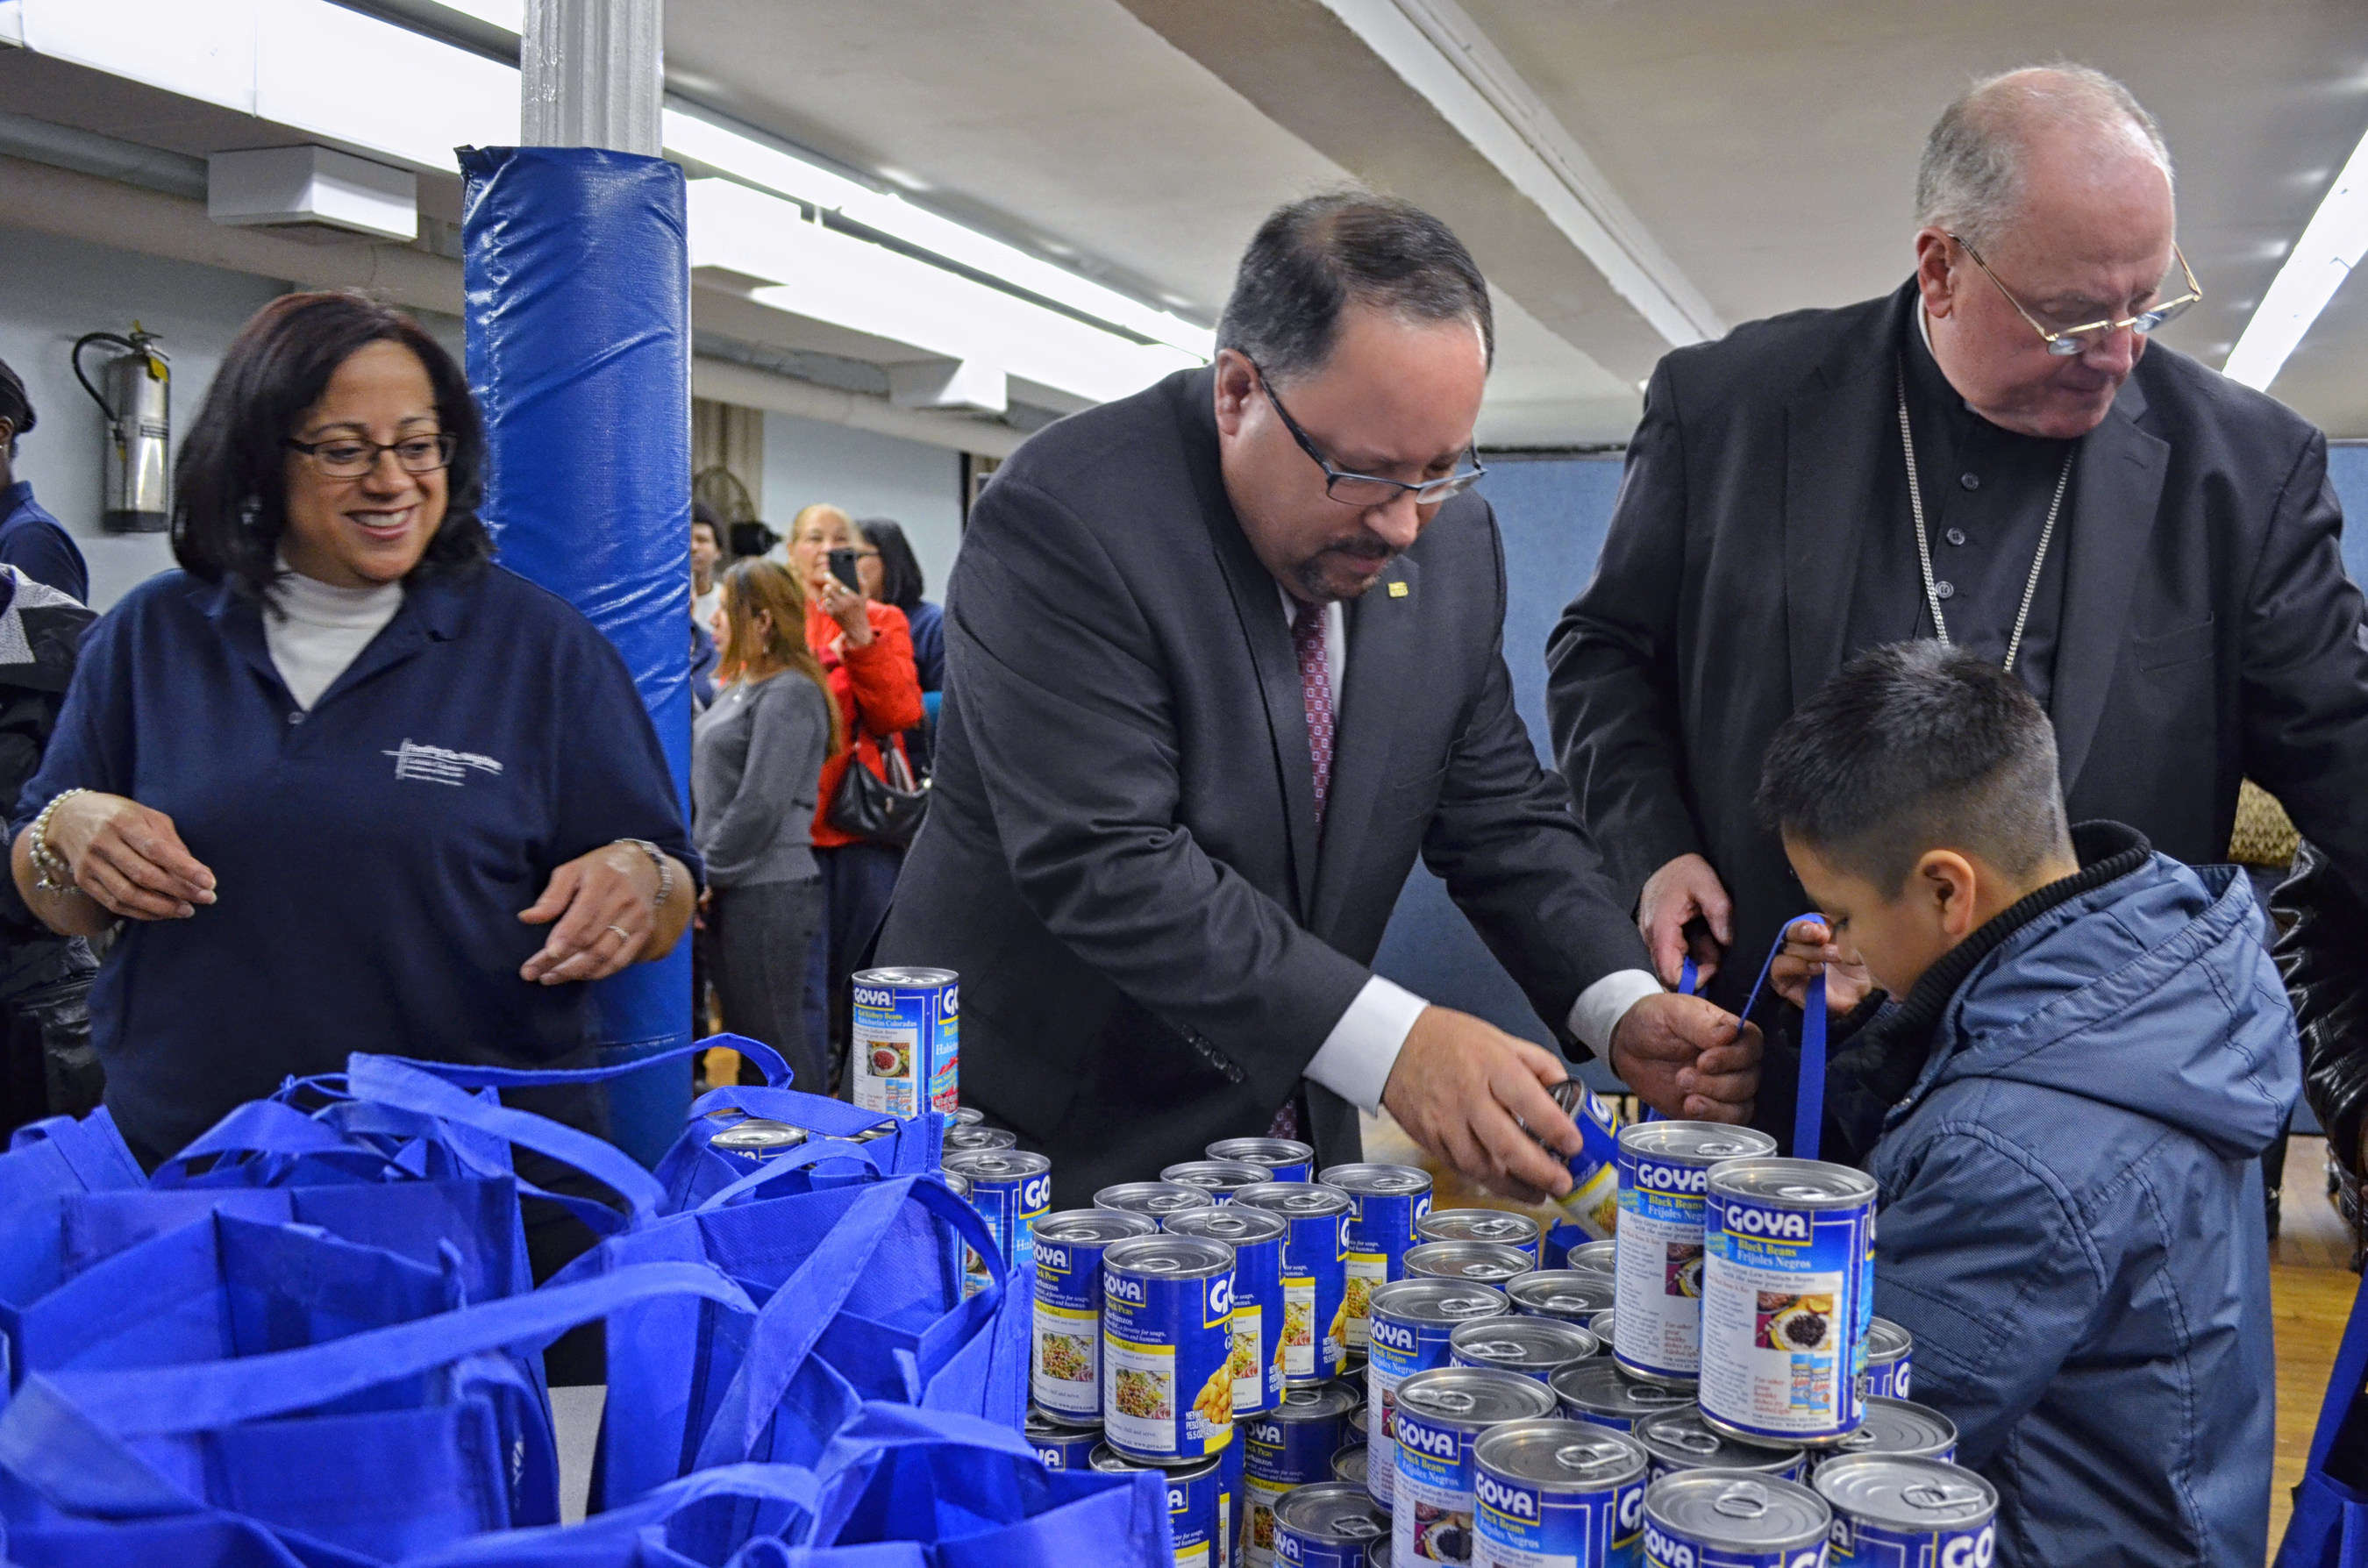 President Bob Unanue of Goya Foods, Cardinal Dolan and Catholic Charities of NY help pack 300,000 pounds of Goya products into bags to give to the hungry and unaccompanied children throughout New York City and the United States.